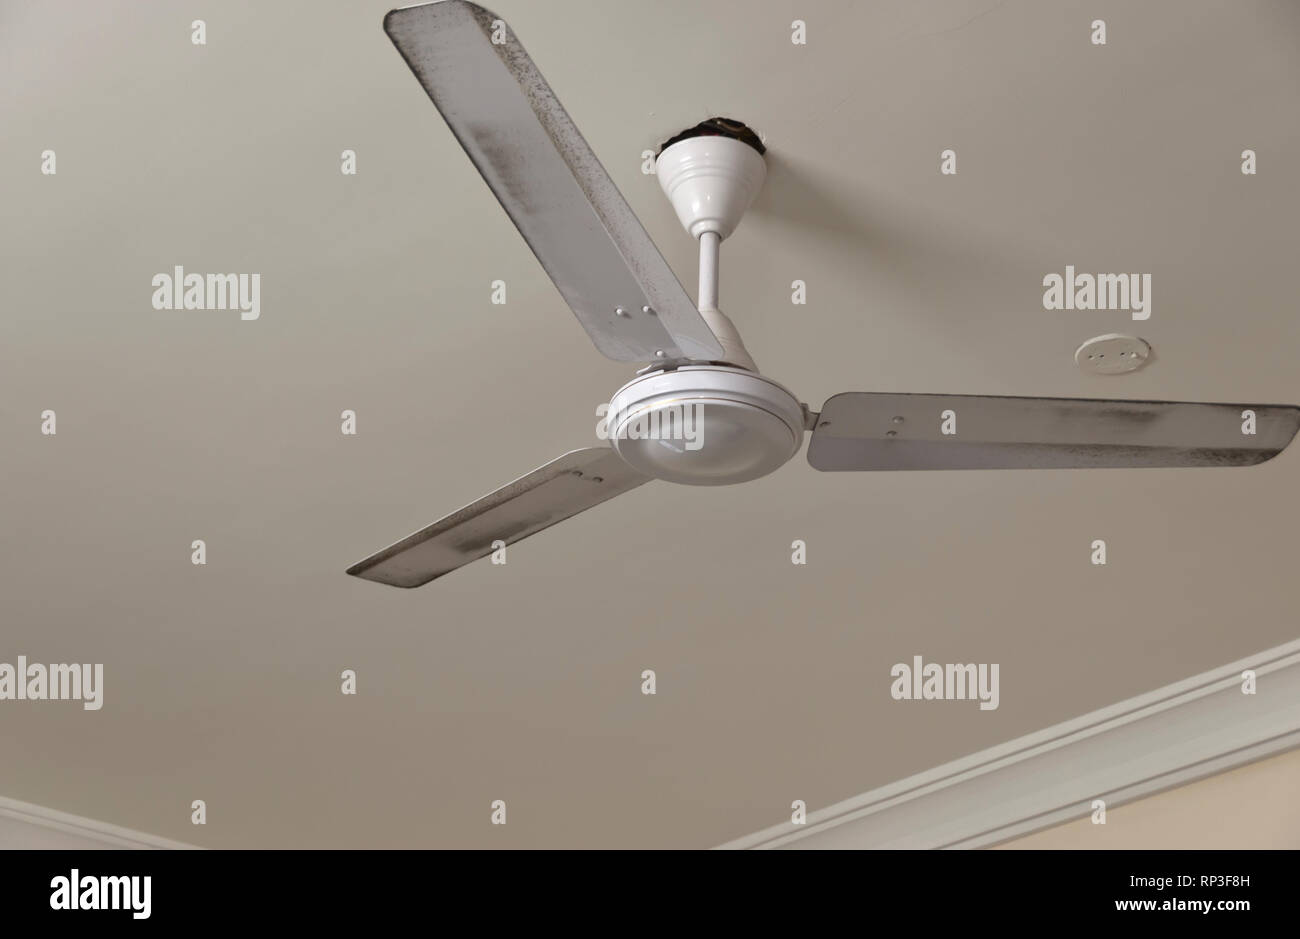 Blades of a ceiling fan covered in dirt and grime in an otherwise clean room. Points to poor indoor air quality in developing countries such as India. Stock Photo